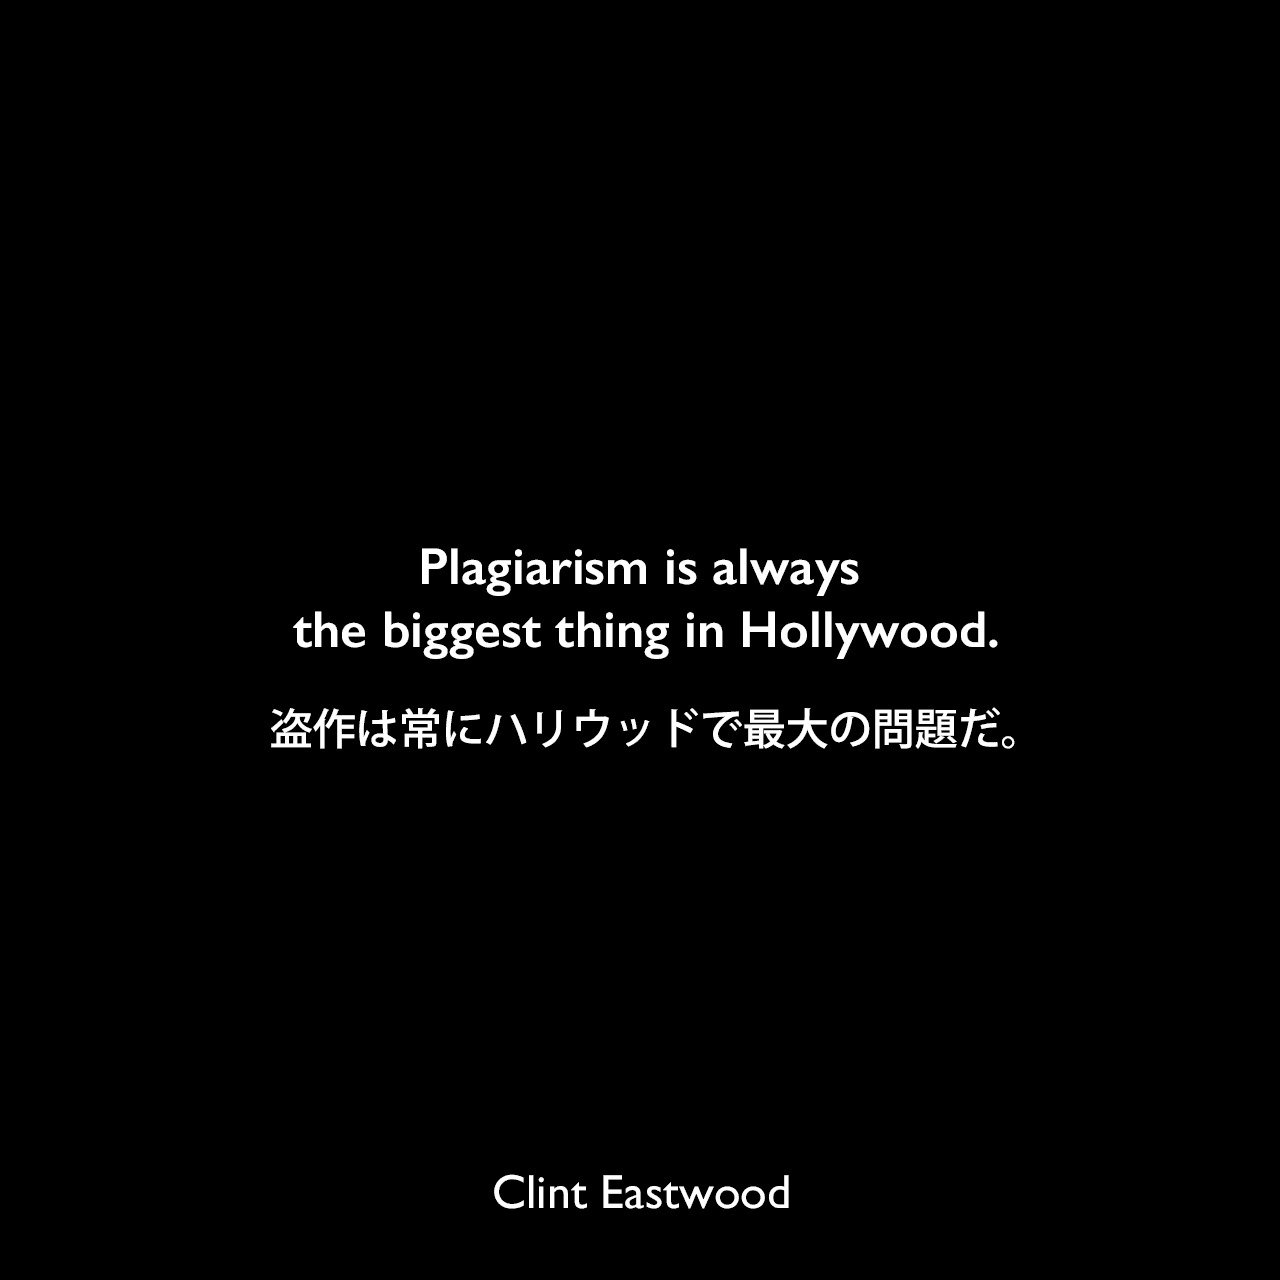 Plagiarism is always the biggest thing in Hollywood.盗作は常にハリウッドで最大の問題だ。Clint Eastwood